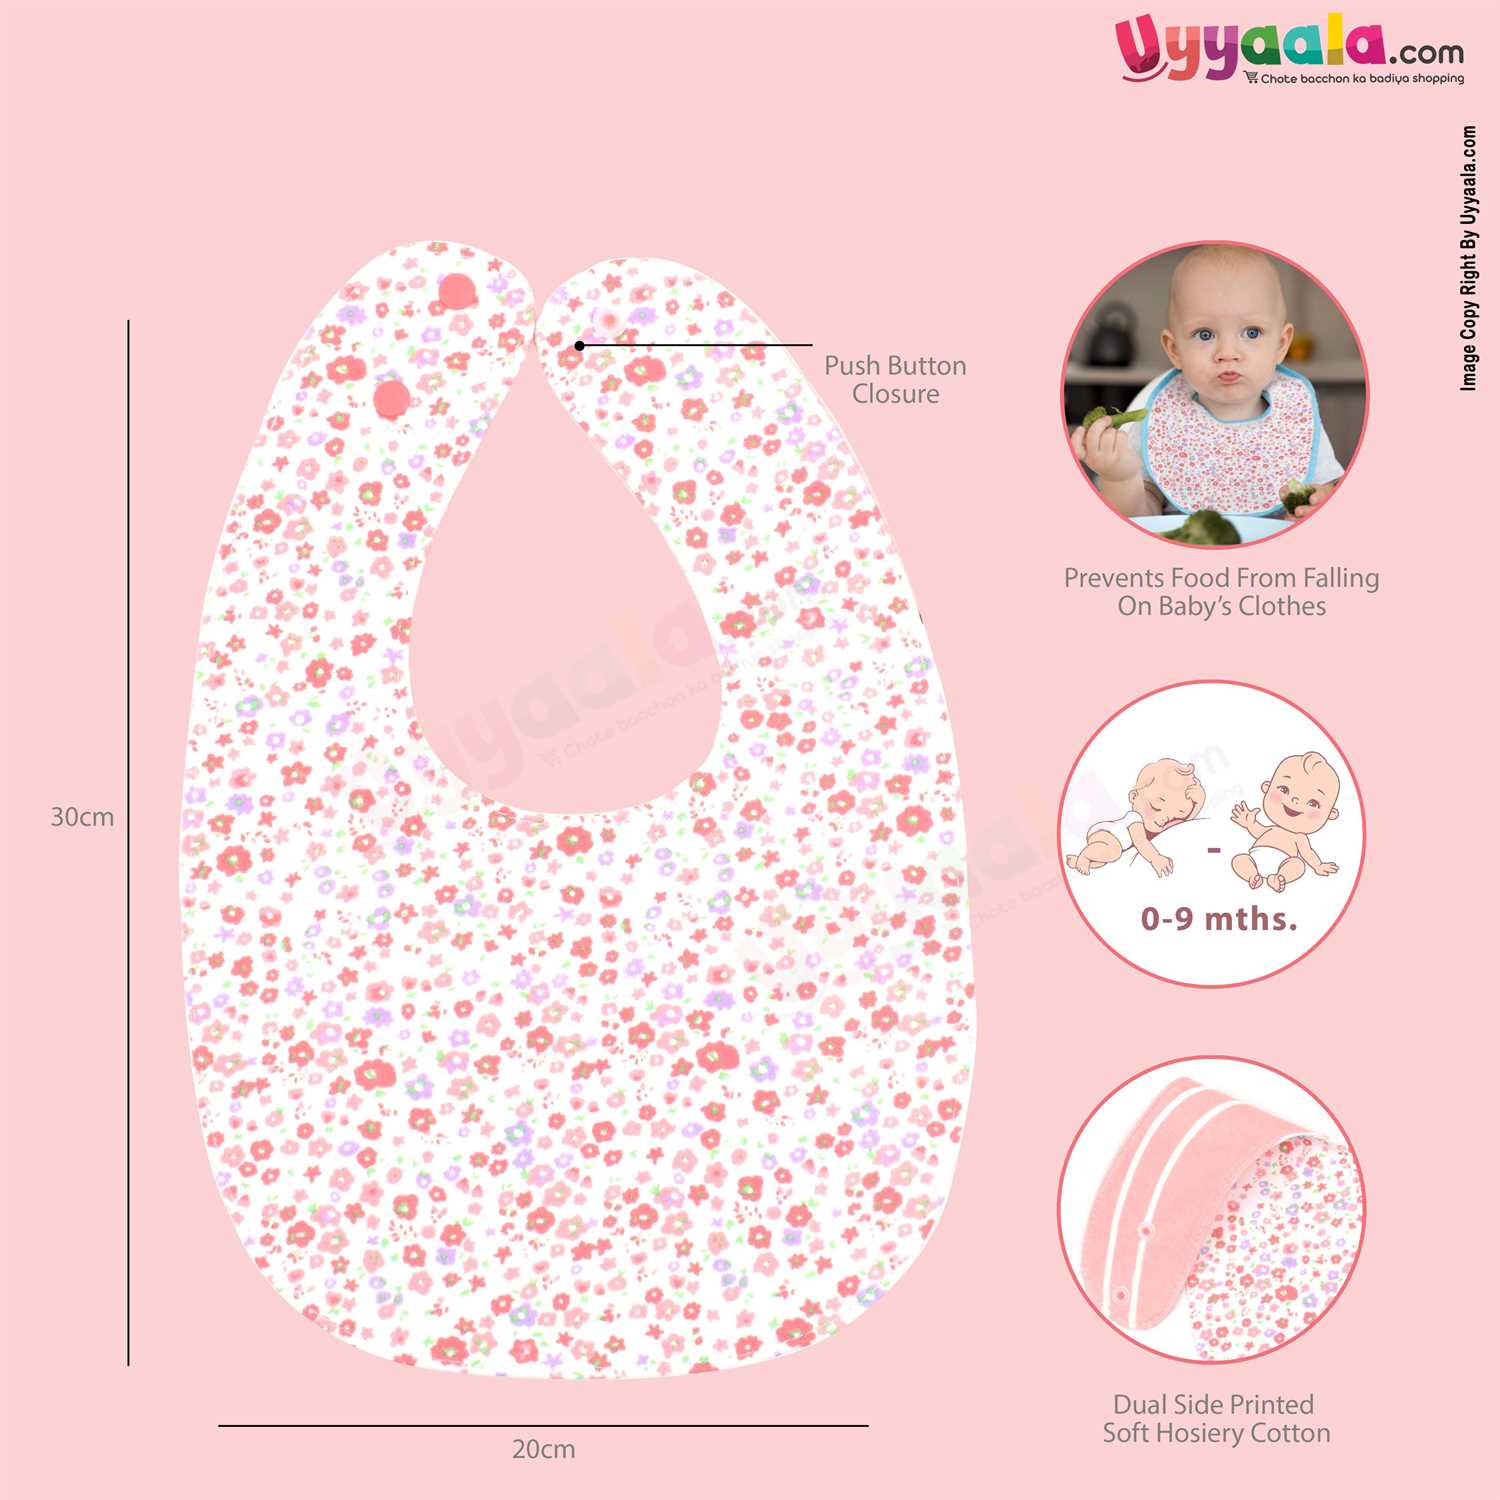 Baby Bib Soft Hosiery Cotton 2 in 1 Usable with Bow & Floral Print for Newborn, Size (29.5*20cm)- Peach & White